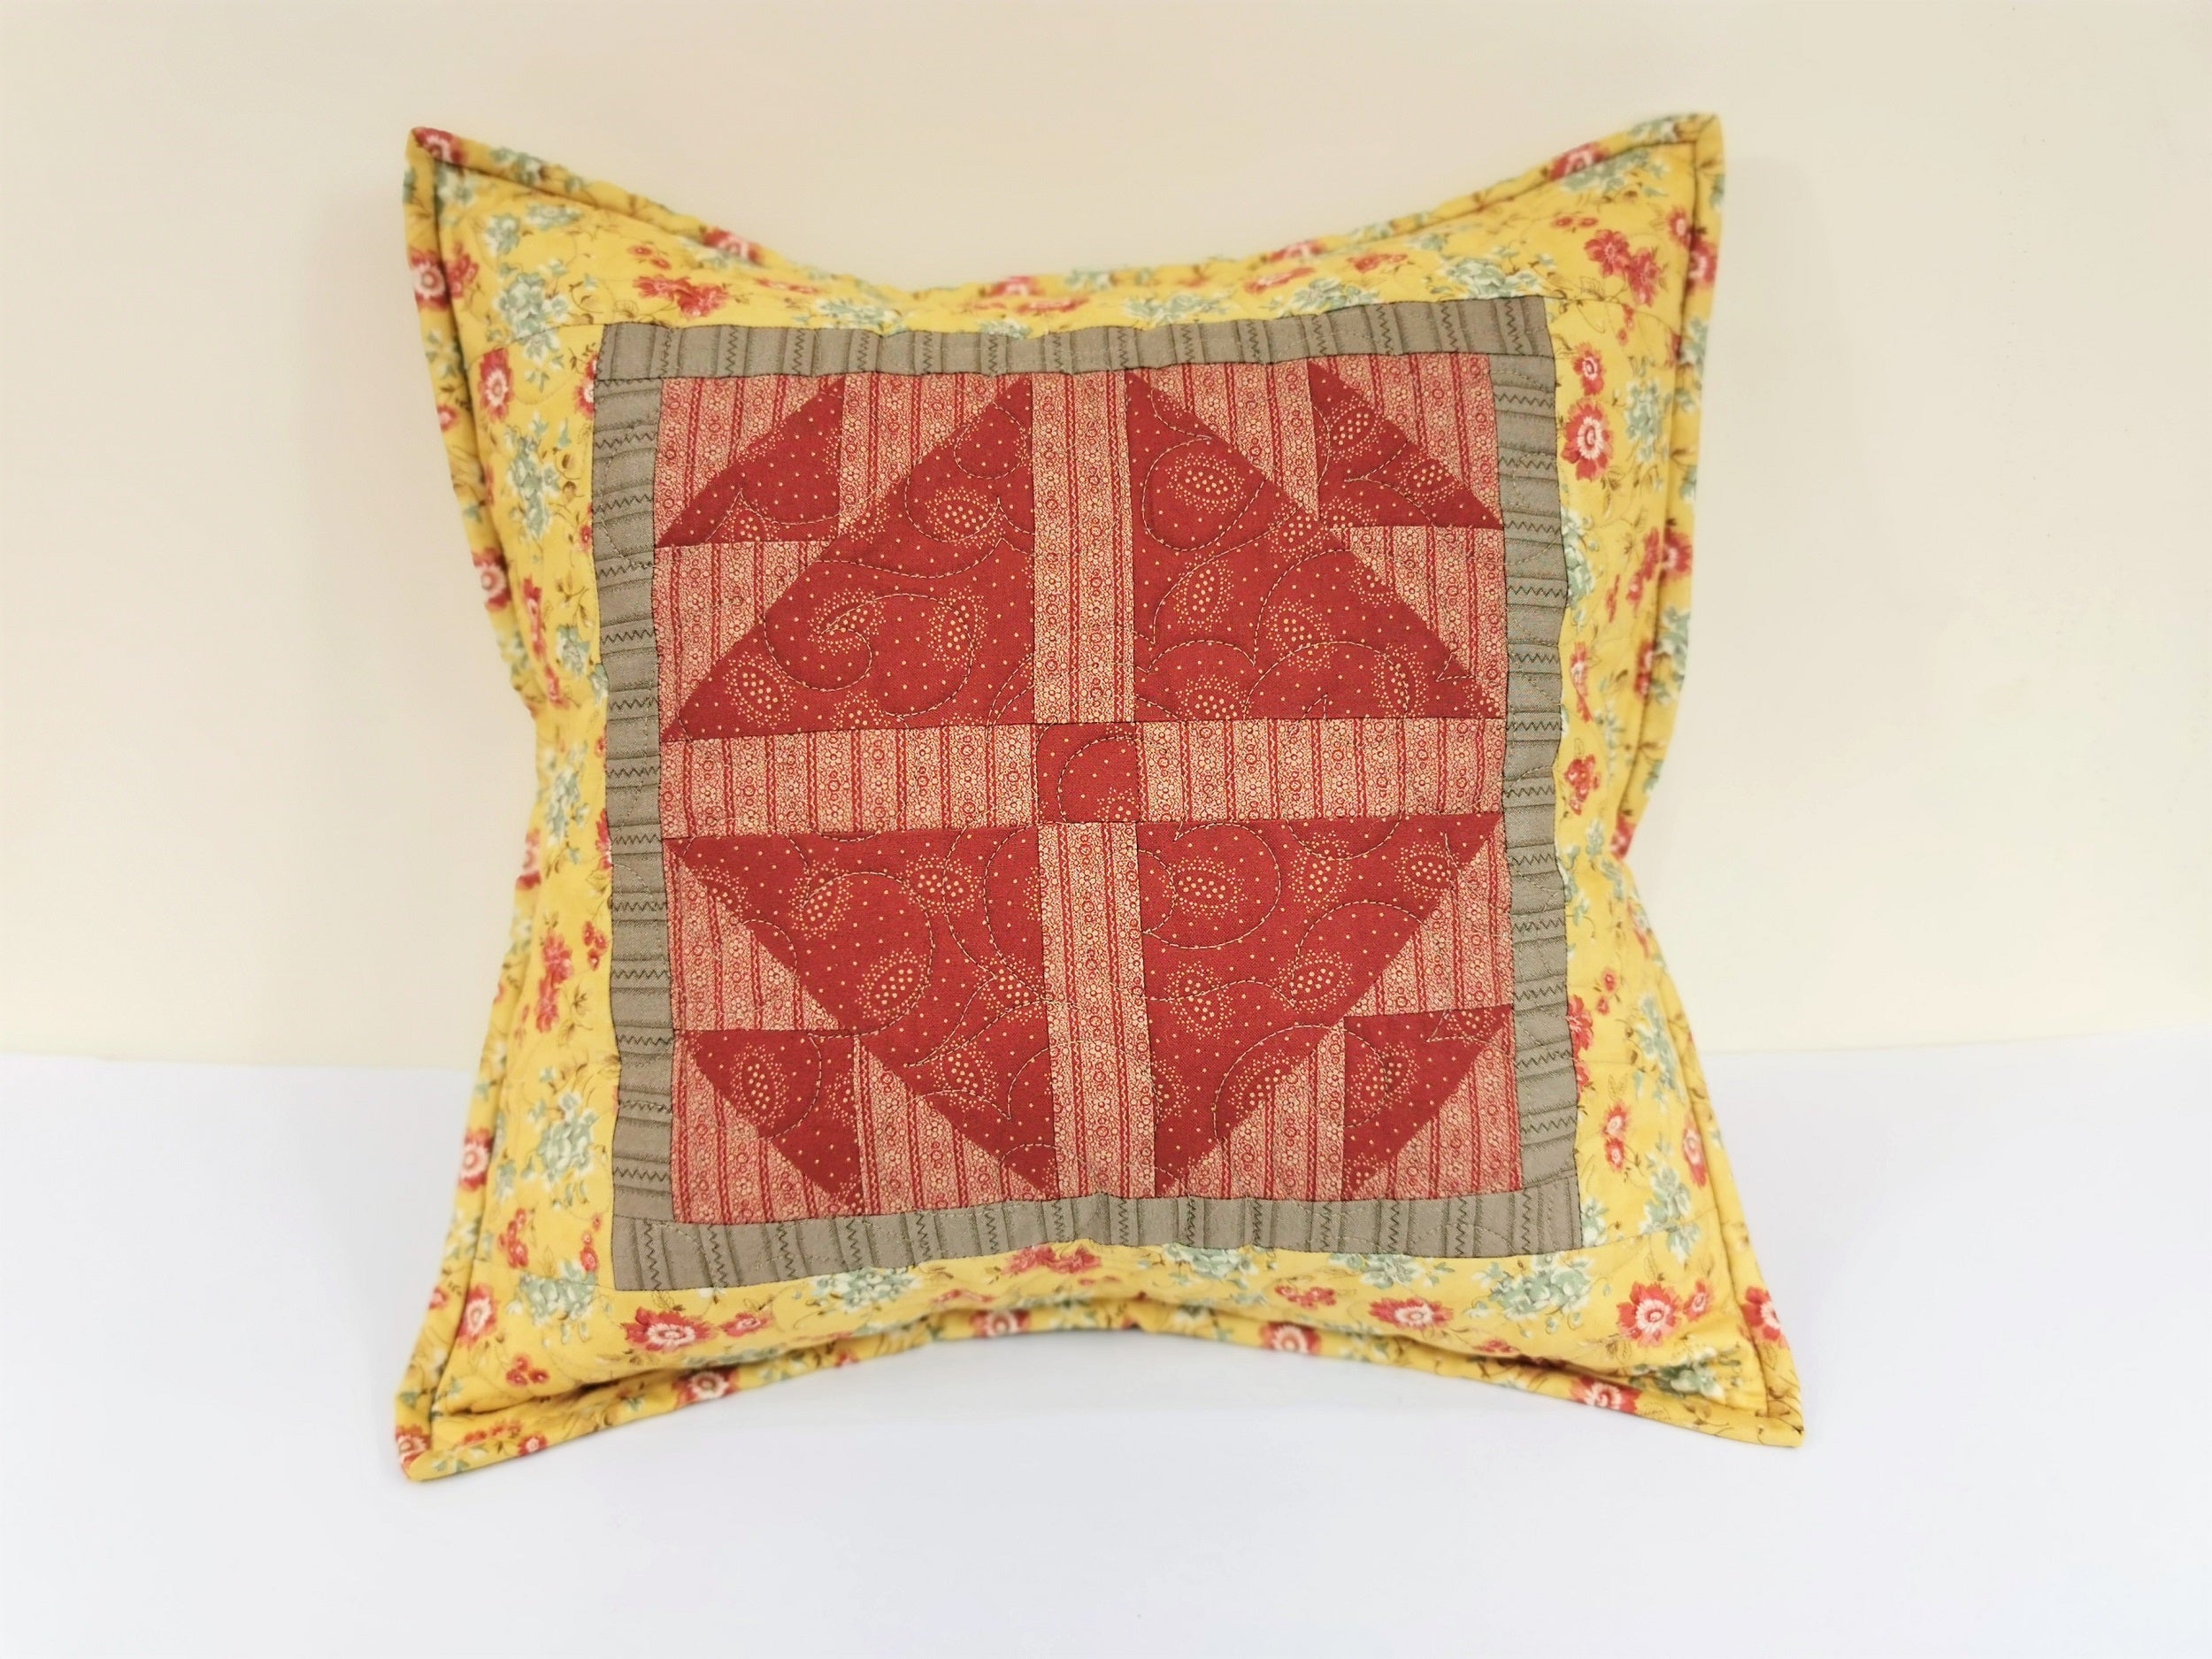 front view of  quilted pillow with two tone red center piecing surrounded by a drab brown border and finished with a coordinating yellow floral fabric